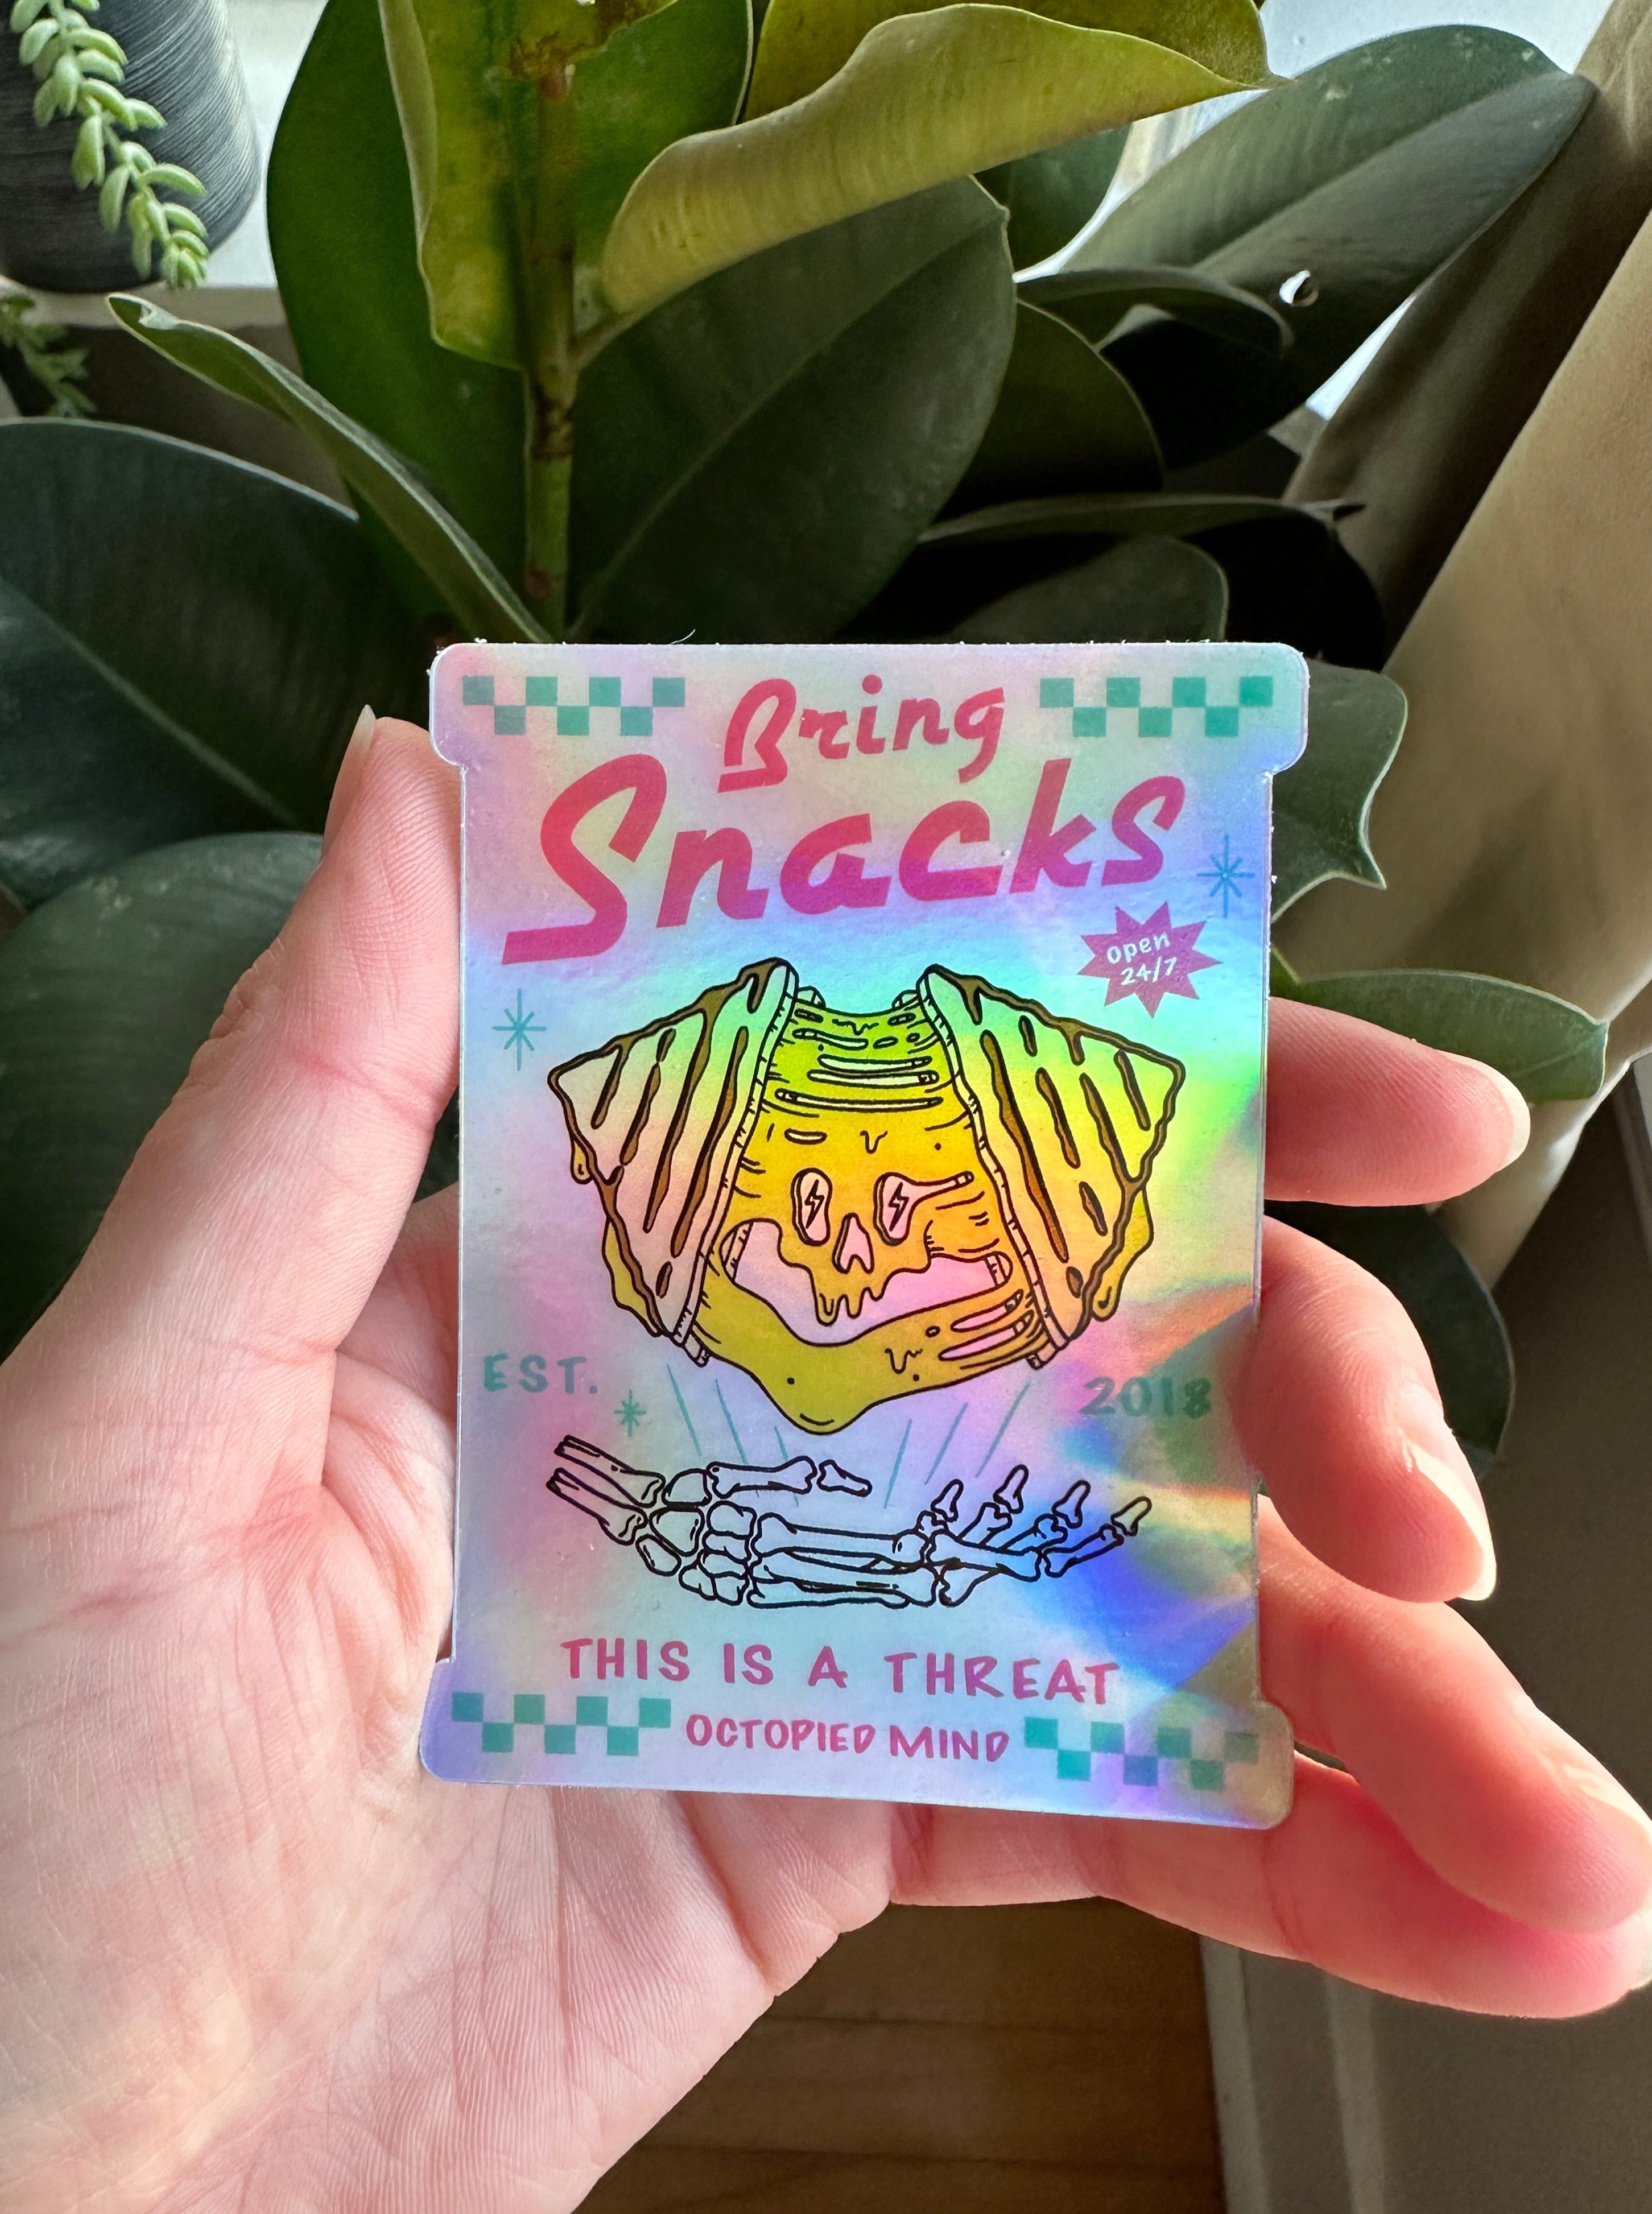 Bring Snacks Holographic Sticker - Octopied Mind